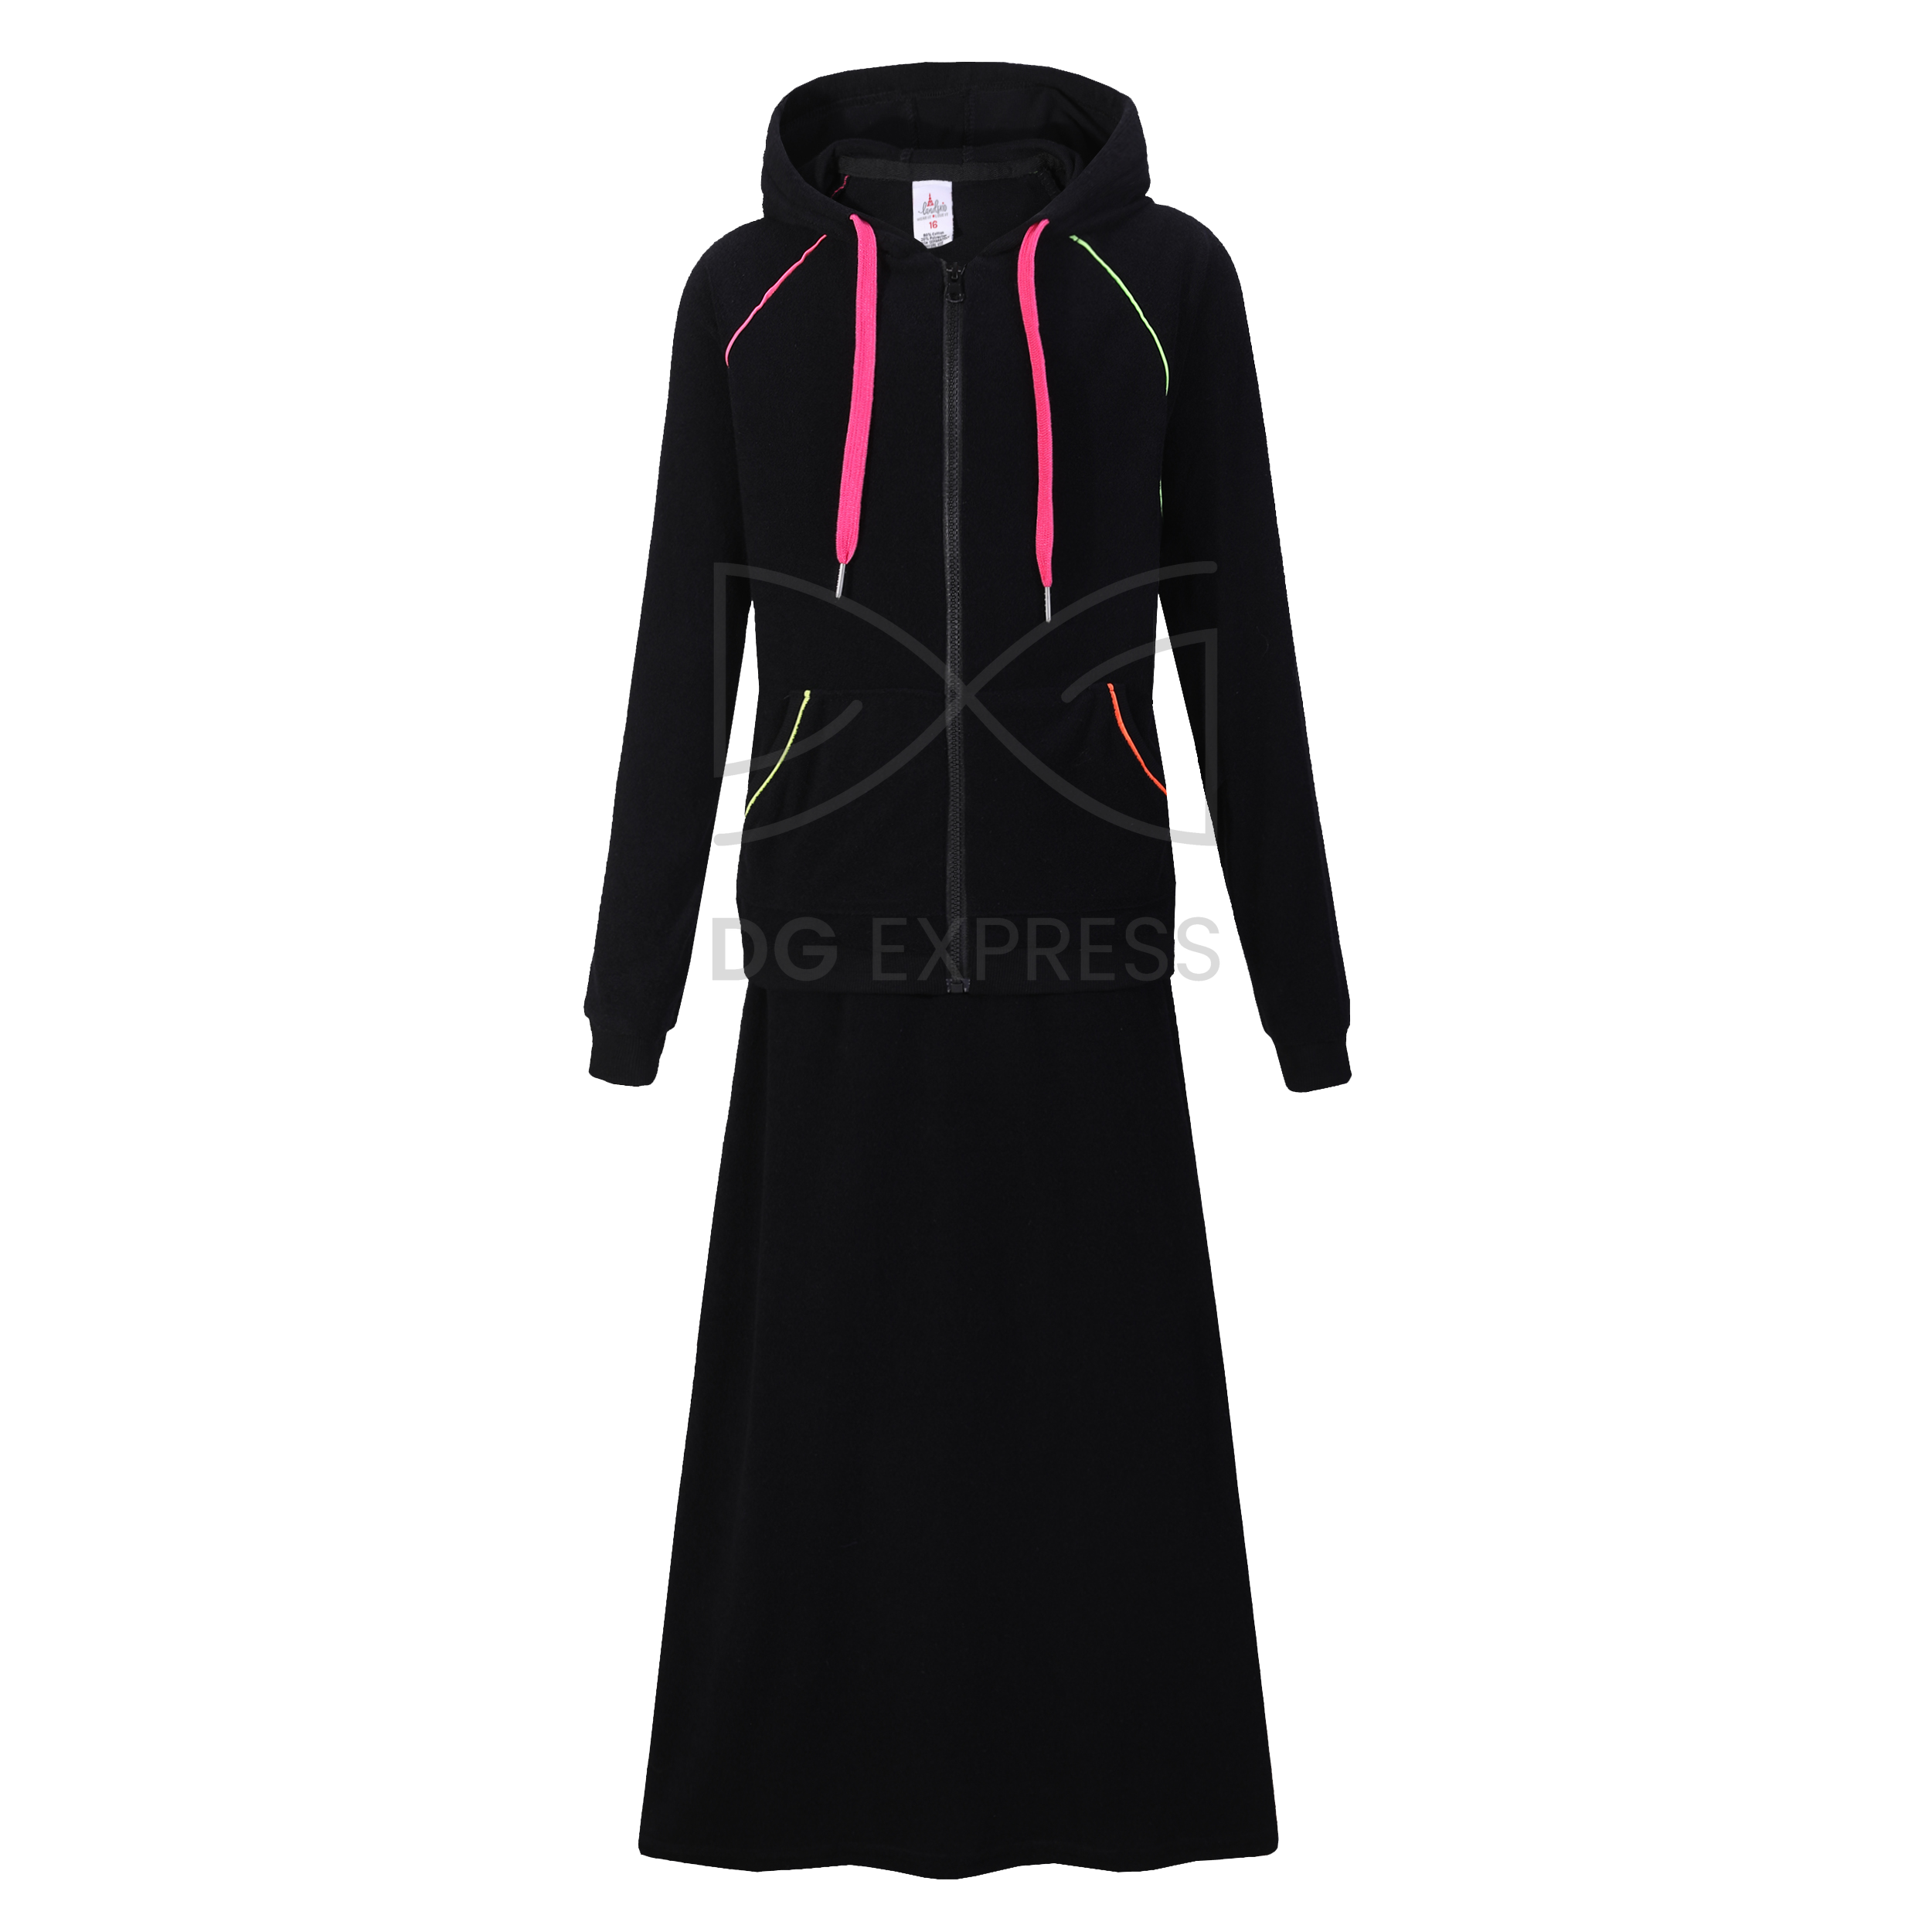 Abstract Women's Black With Neon Trim Terry Robe